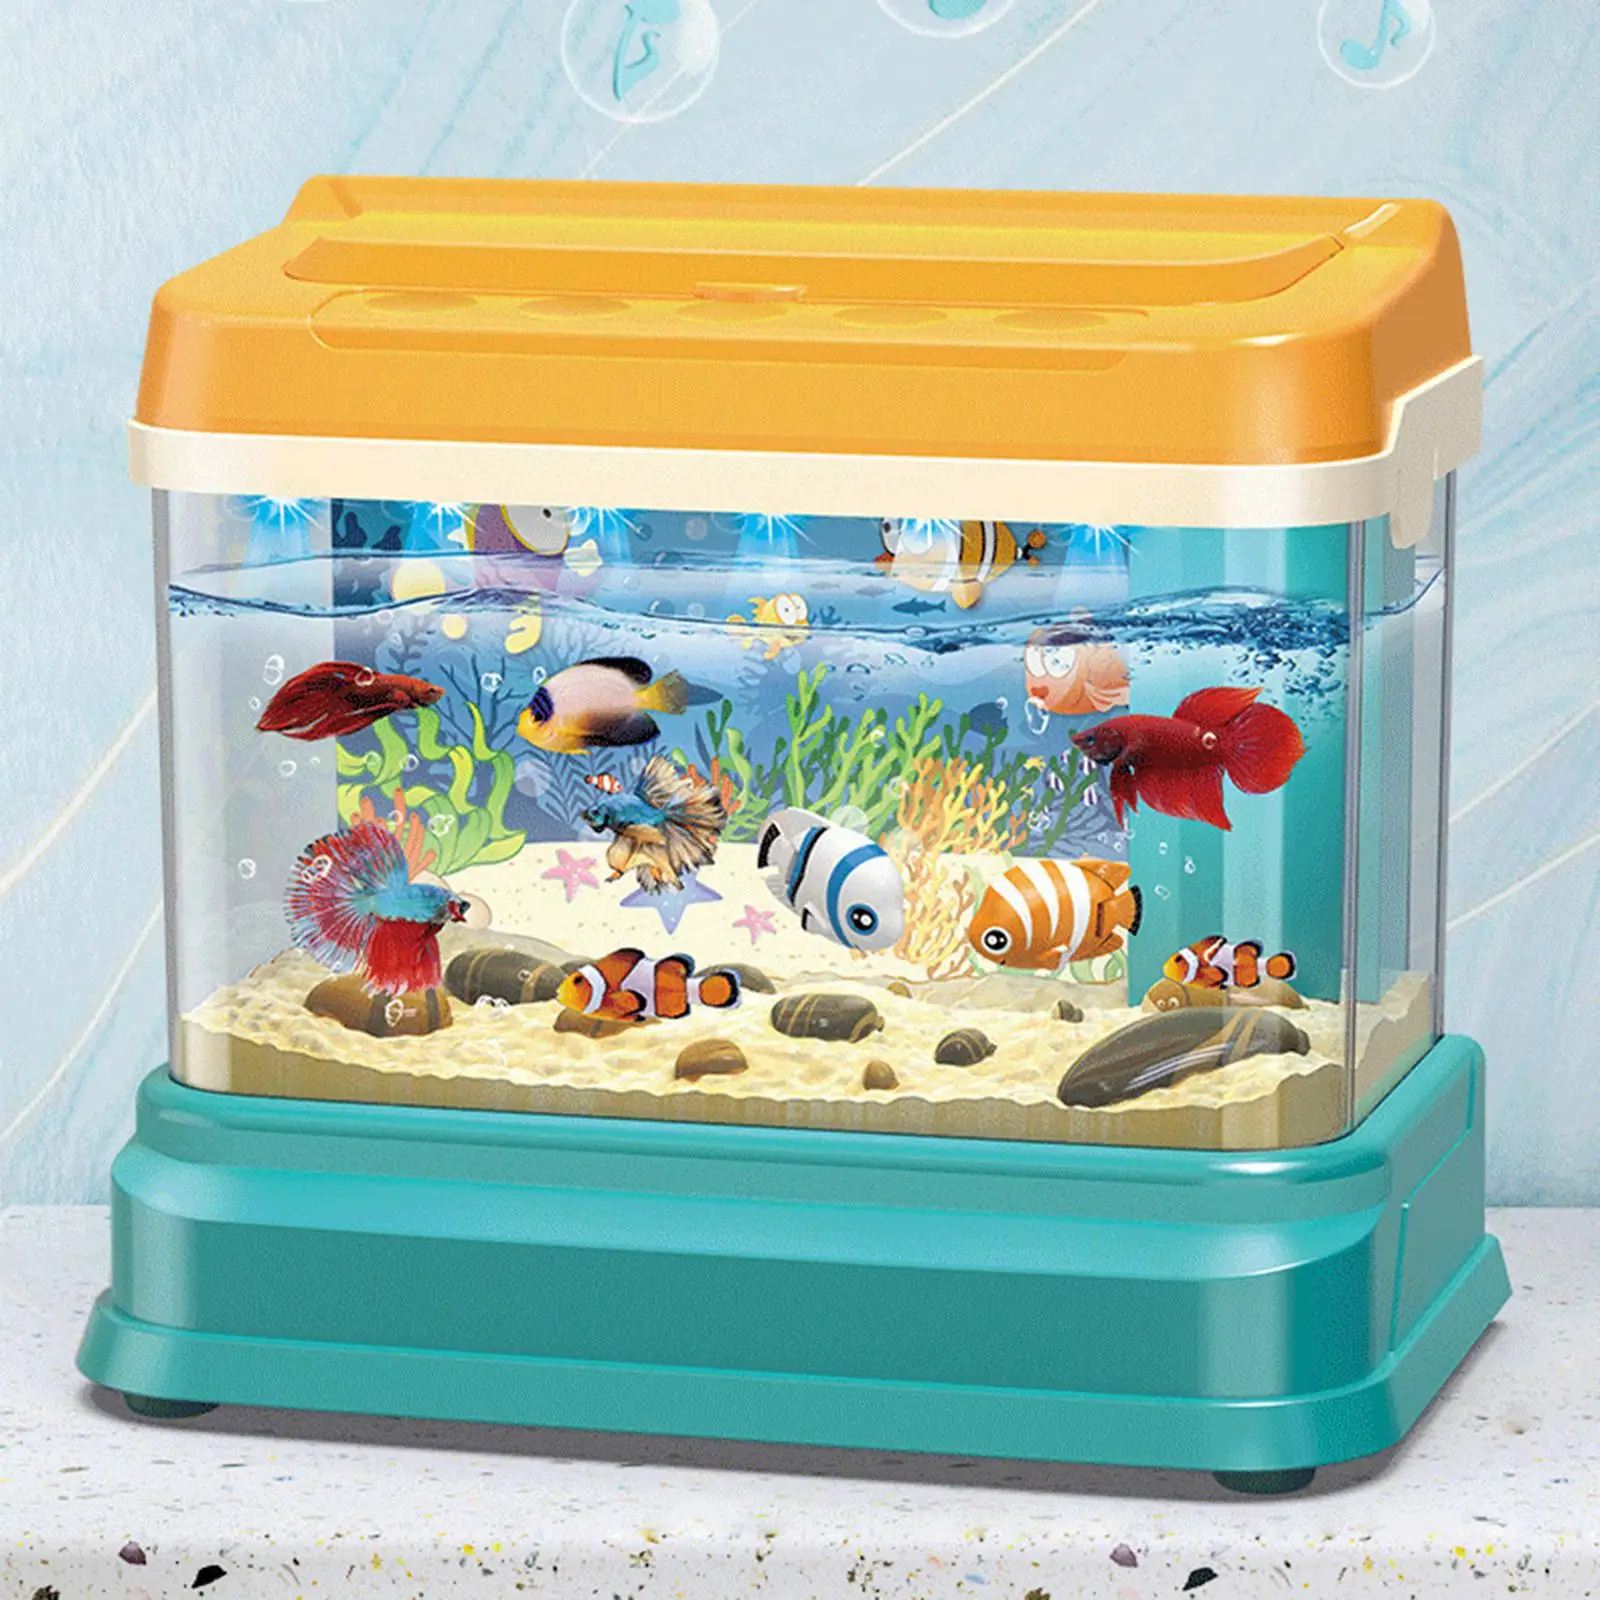 Artificial Fish Tank with Moving Music Fishing Rod Kids Fishing Toys Small Aquarium for Toddlers Kids Children